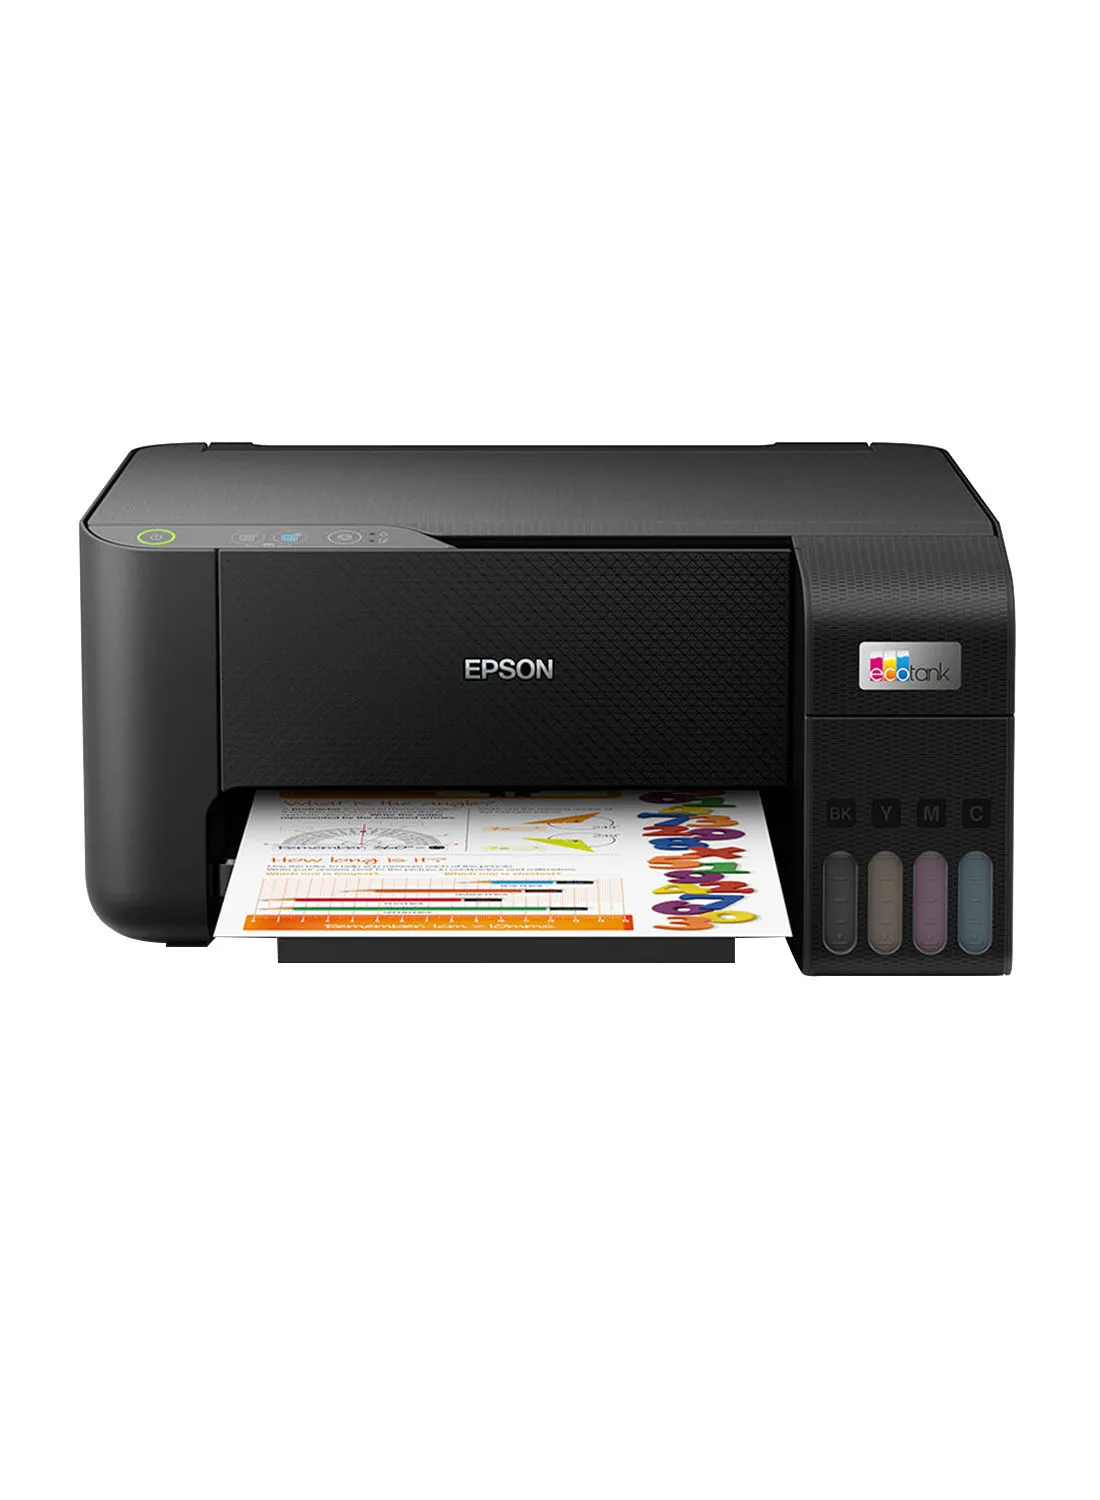 EPSON Ecotank L3210 Home Ink Tank Printer A4, Colour, 3-In-1 With And Smartpanel App Connectivity Black